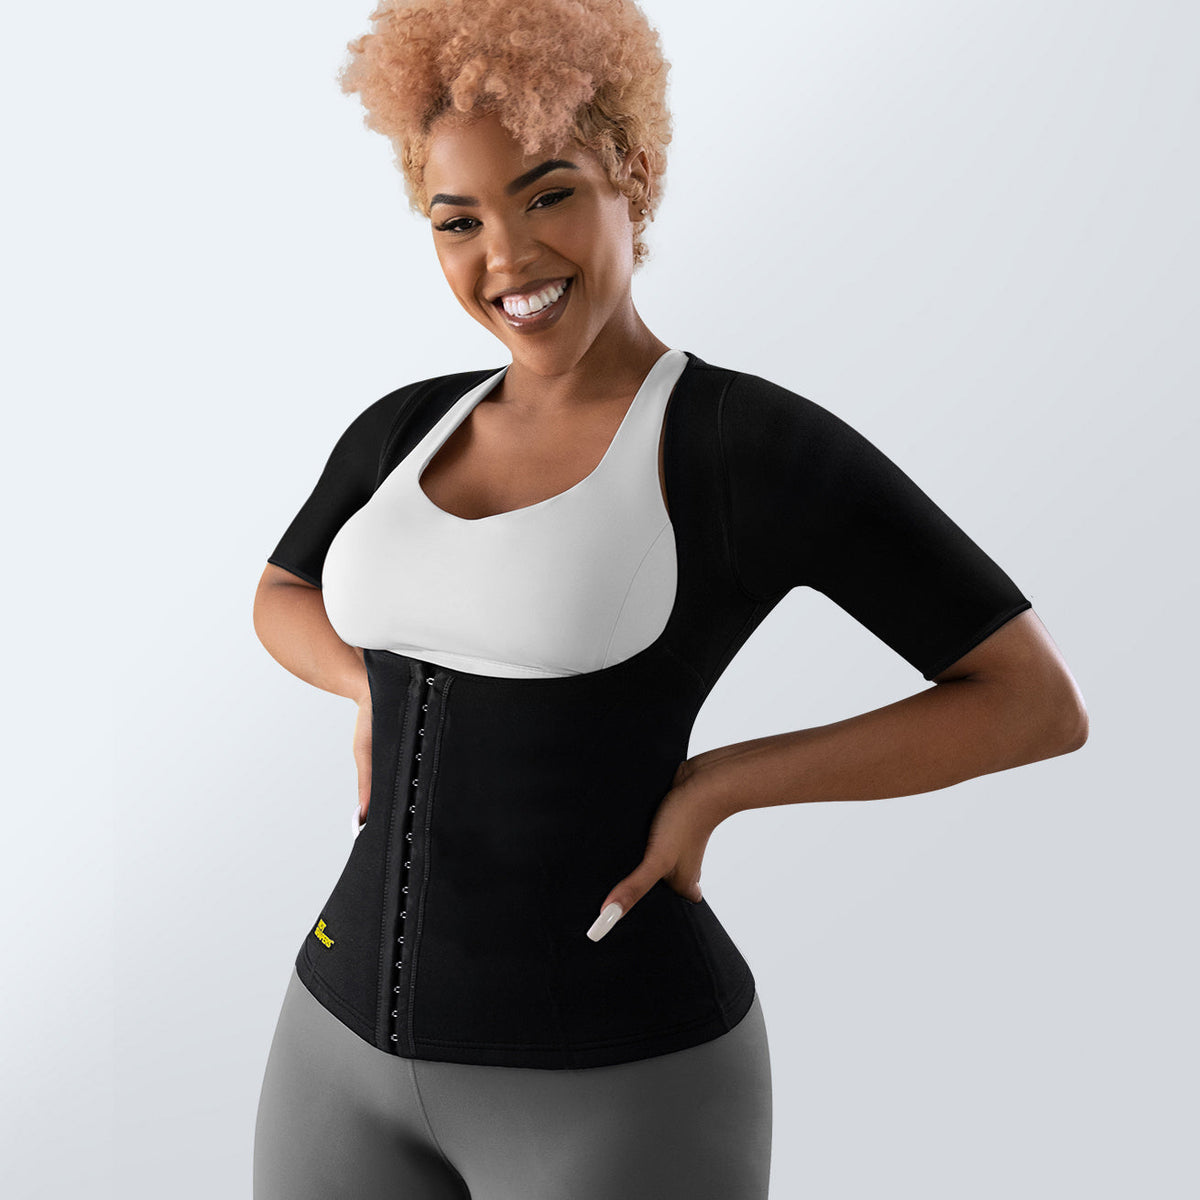 HOT SHAPERS Cami Hot Waist Cincher with Waist Trainer and Shaper